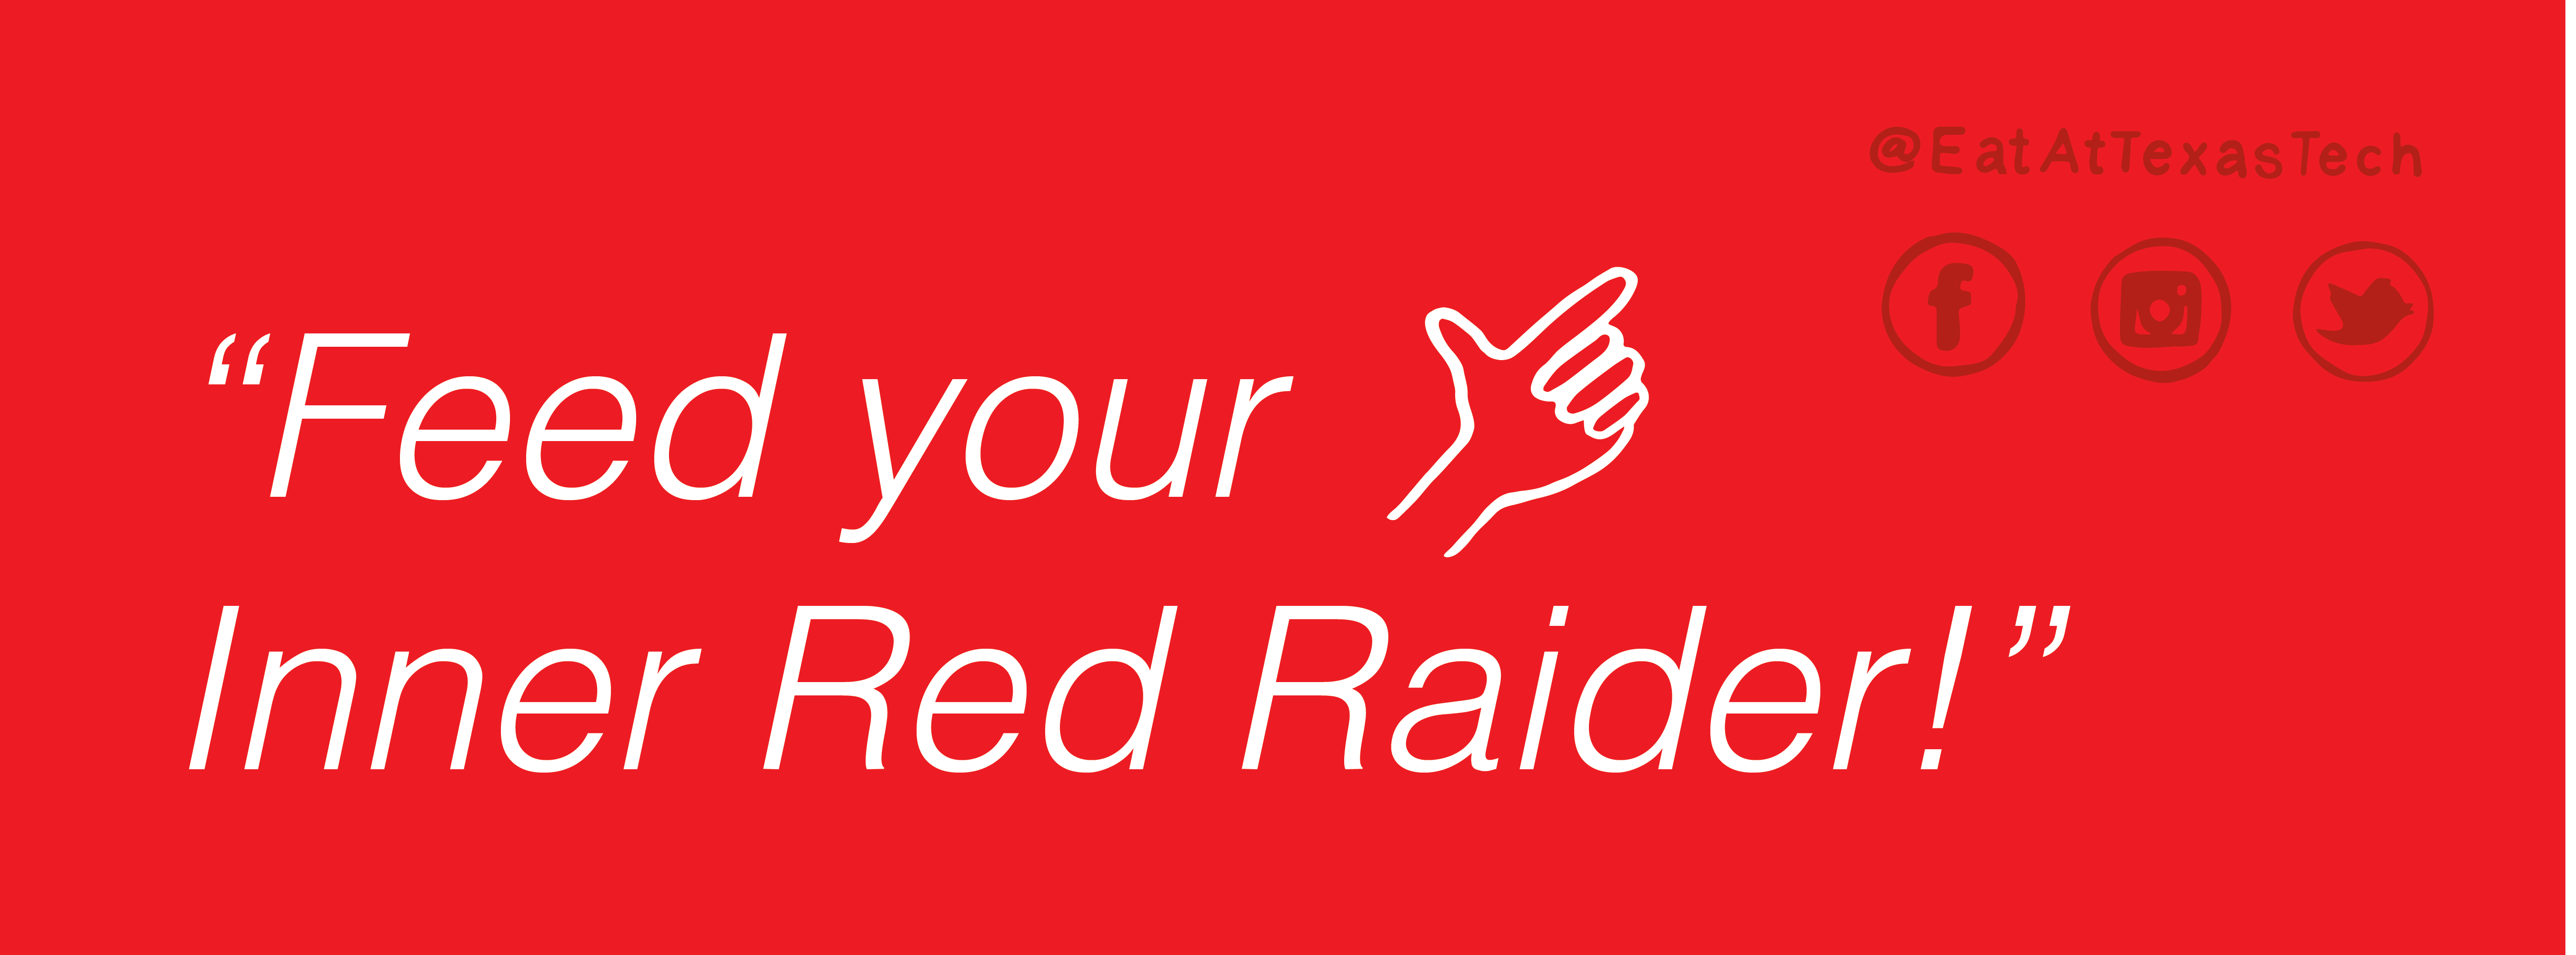 feed your inner red raider